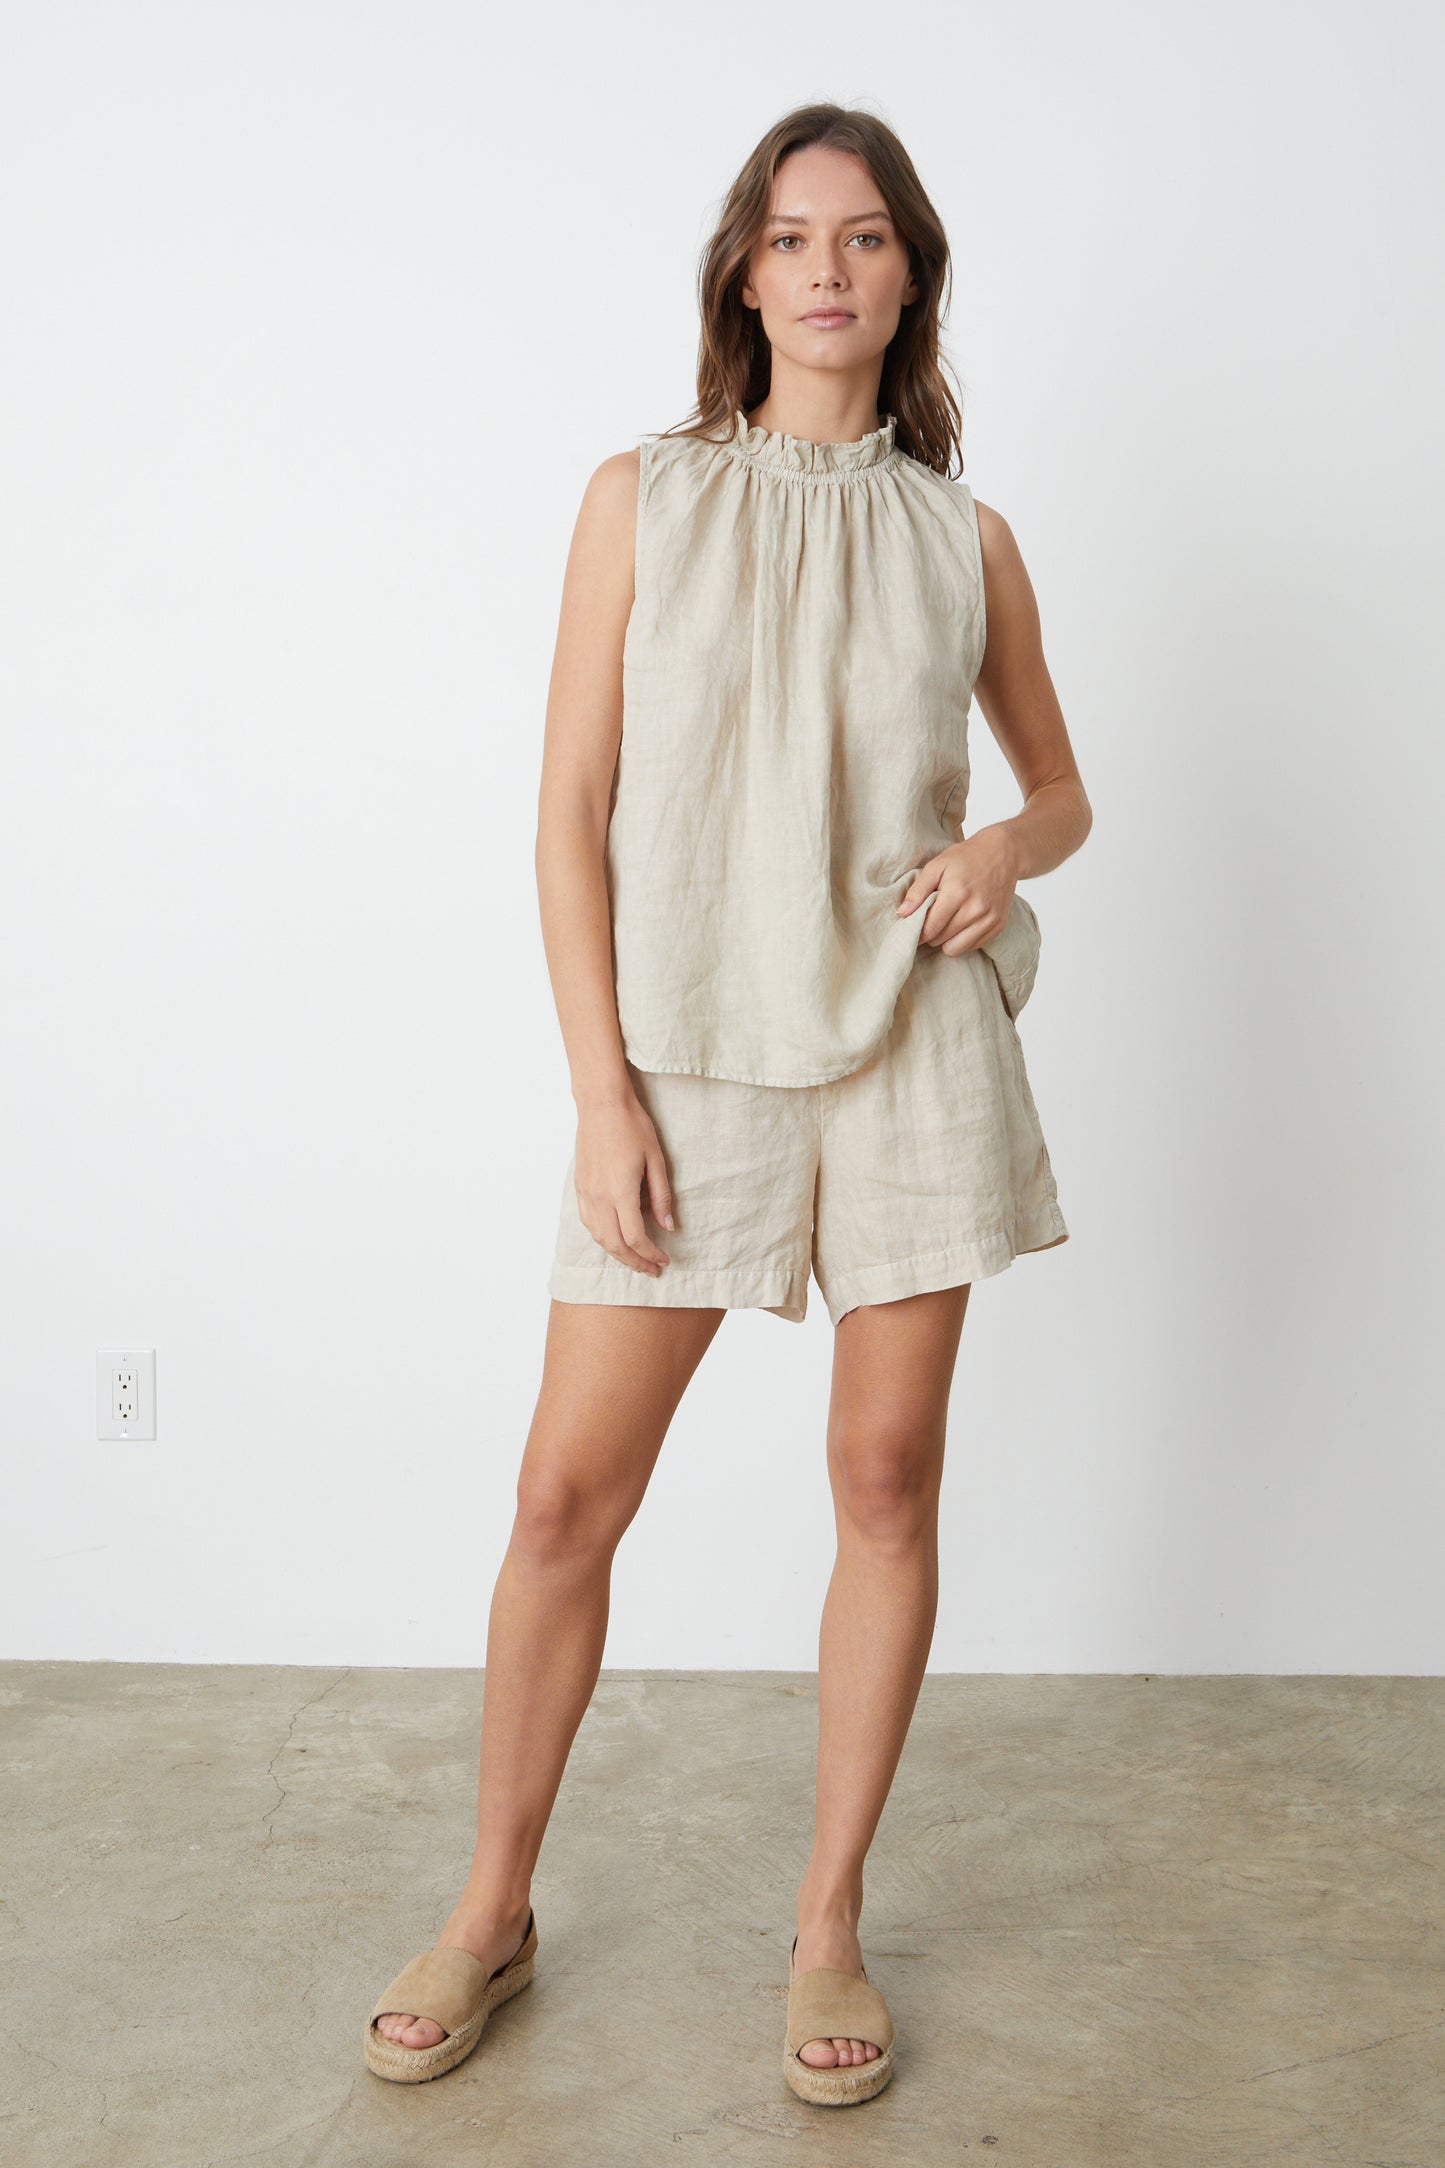 A woman wearing a sleeveless NOVA LINEN TOP by Velvet by Graham & Spencer and shorts in sand full length front shot with sandals.-26577321525441